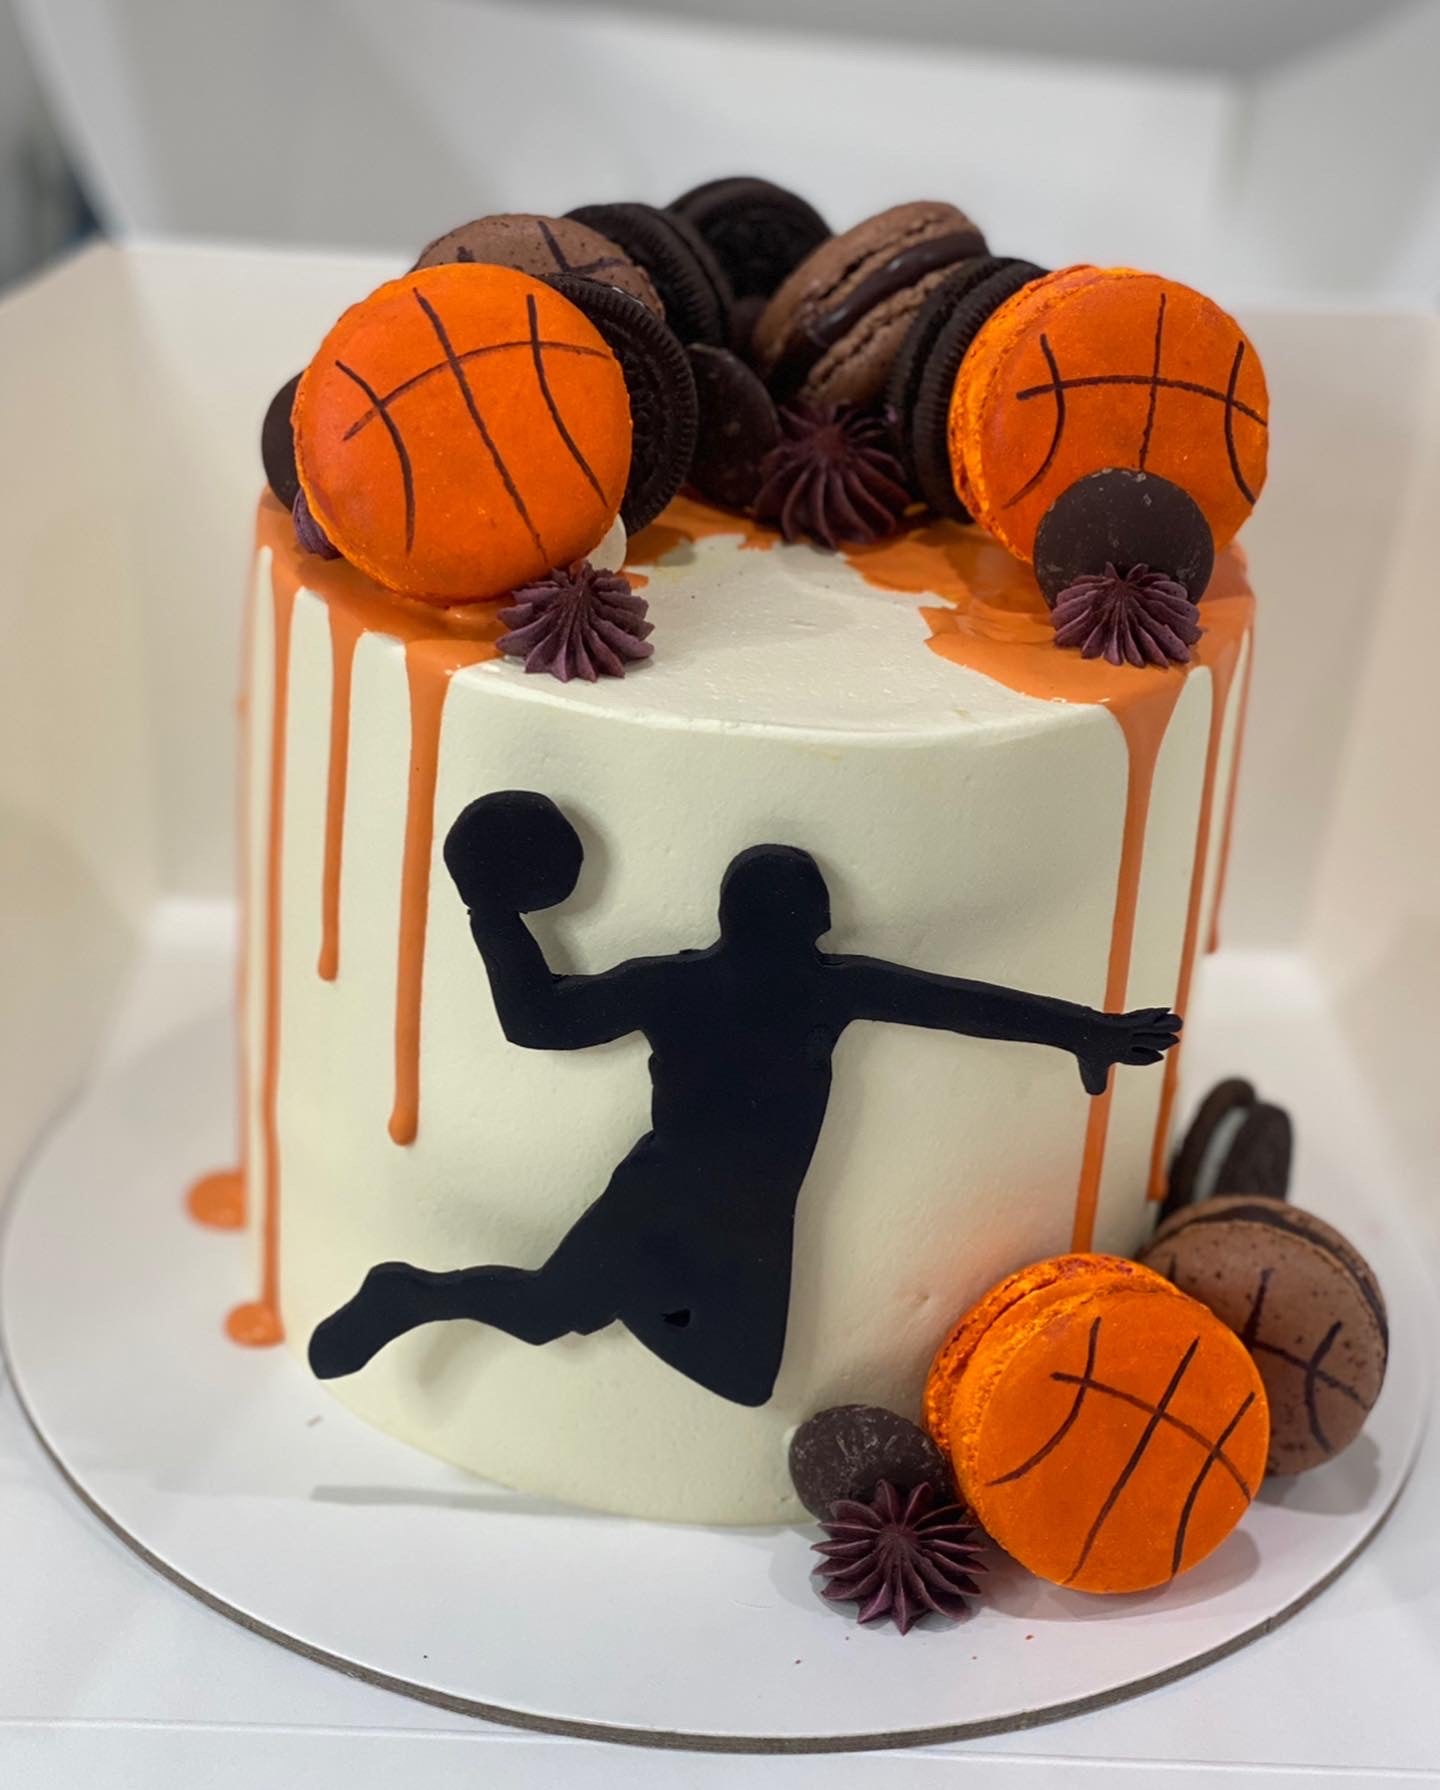 Basketball Shaped Tiered Cake - Classy Girl Cupcakes